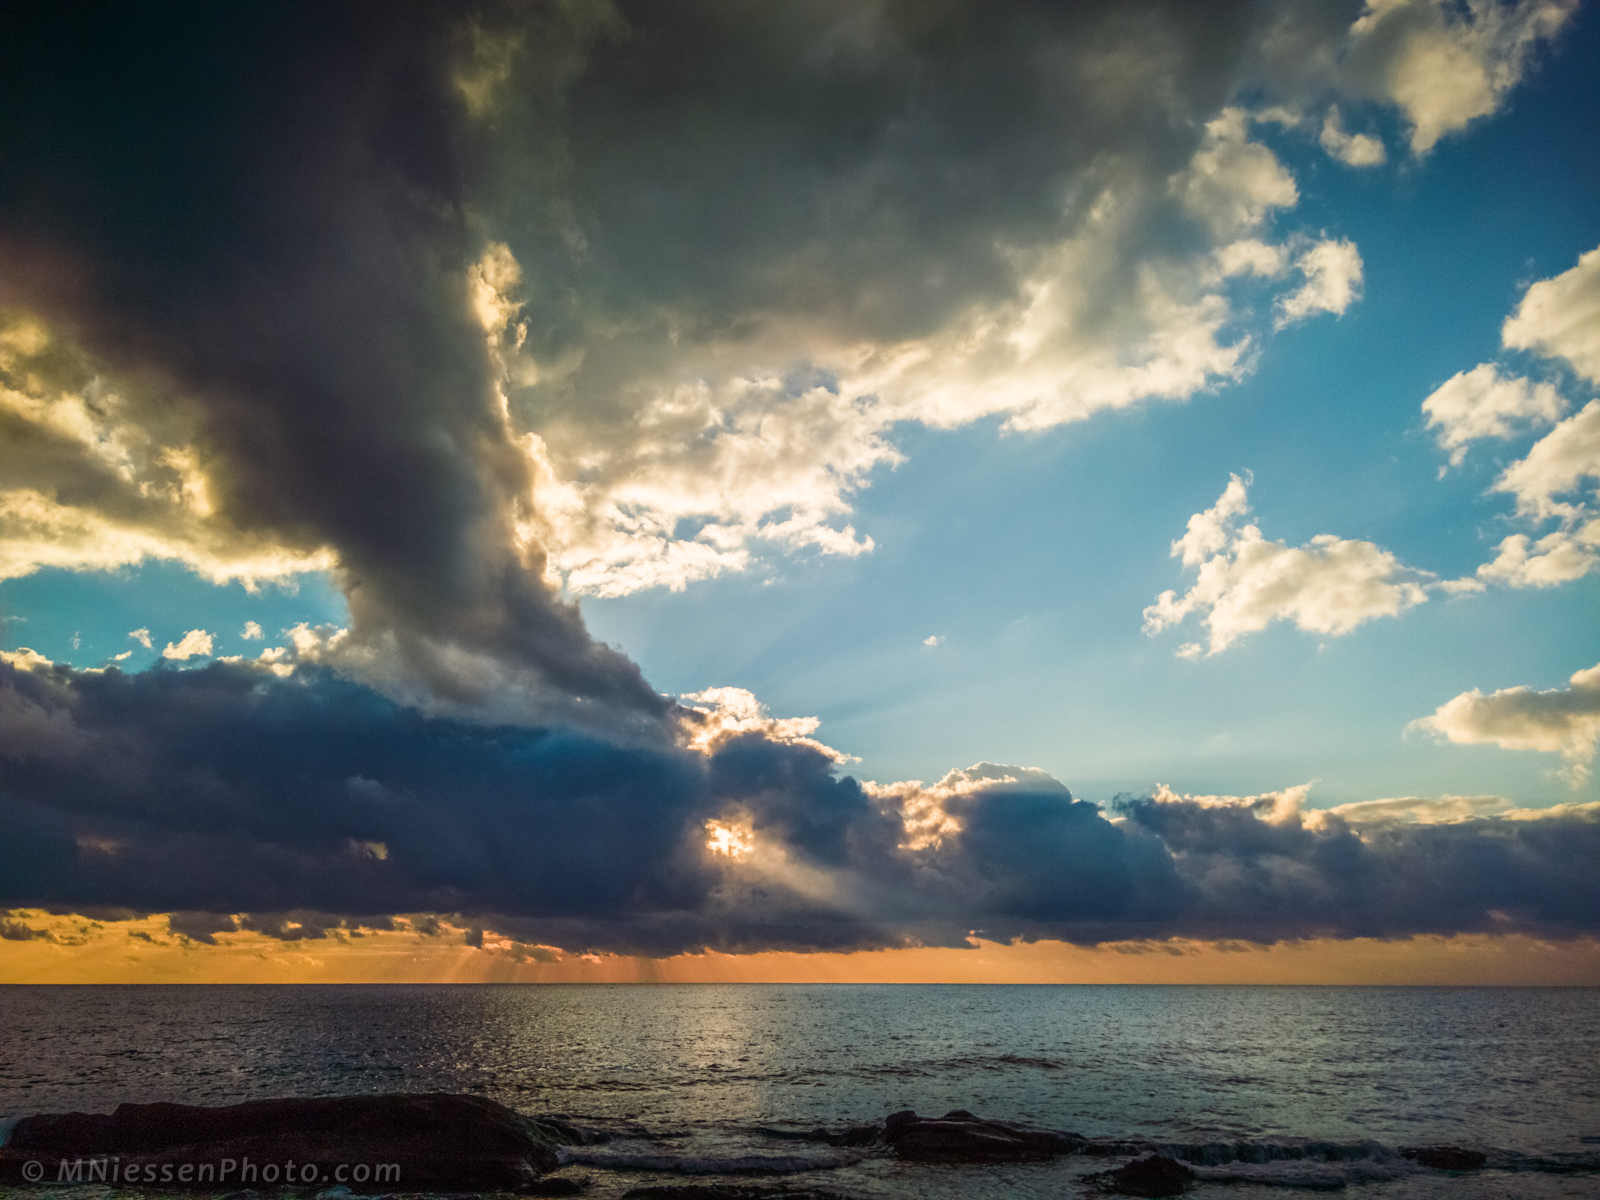 That day on the French Riviera started very well with this amazing sunrise, complete with tornado-shaped clouds and a great focused ray of light.